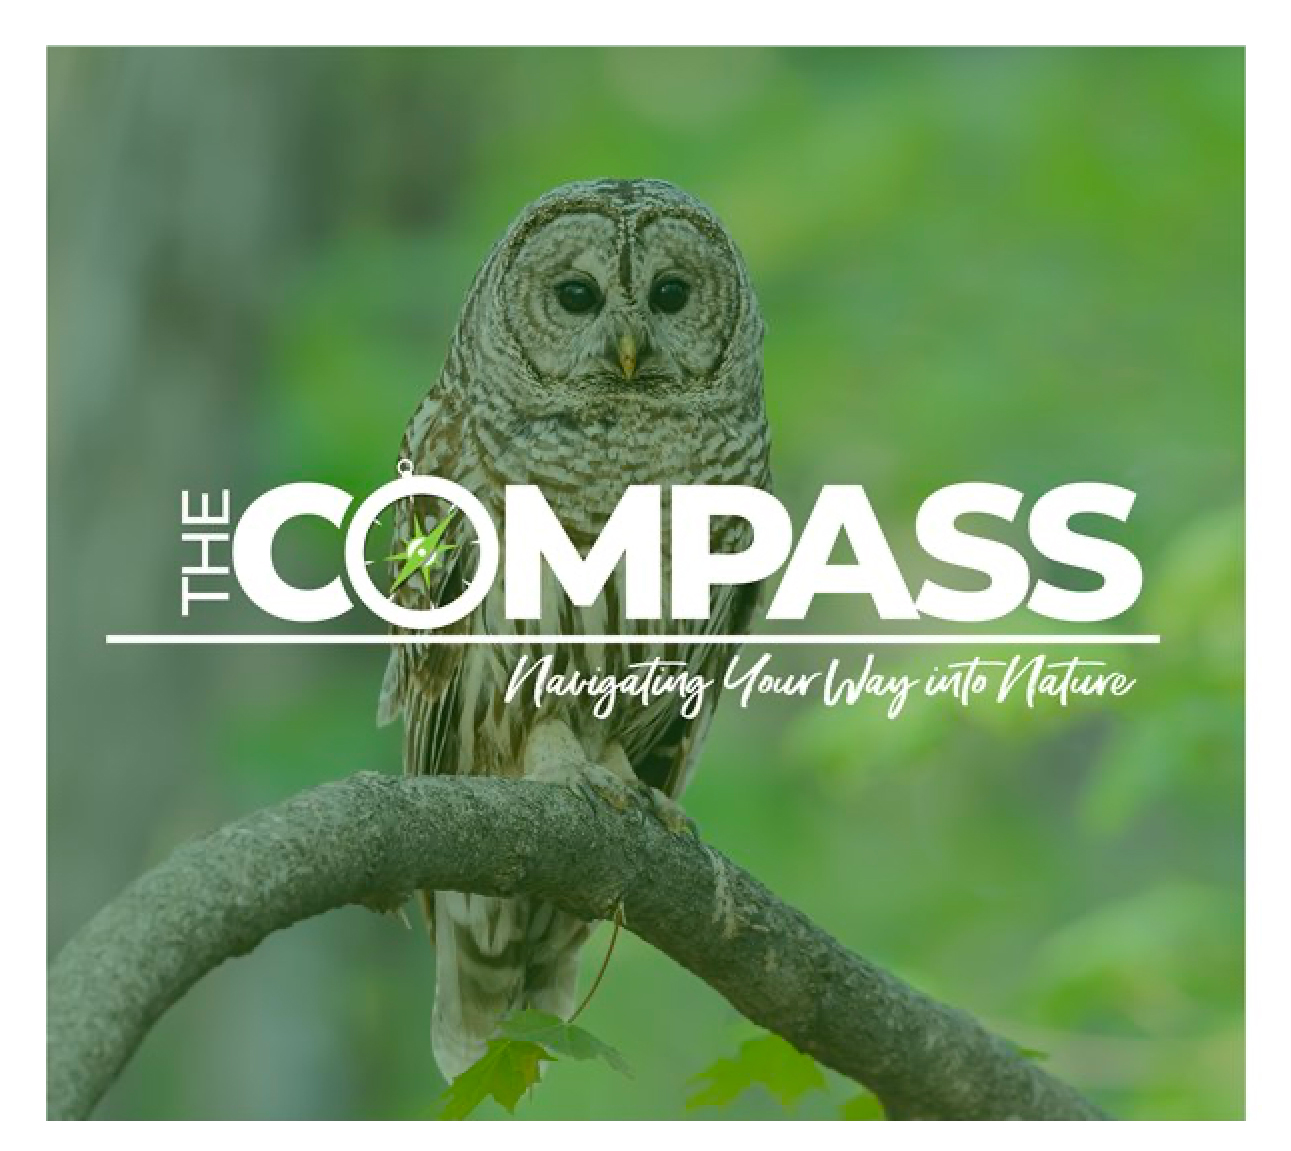 Image of Compass newsletter